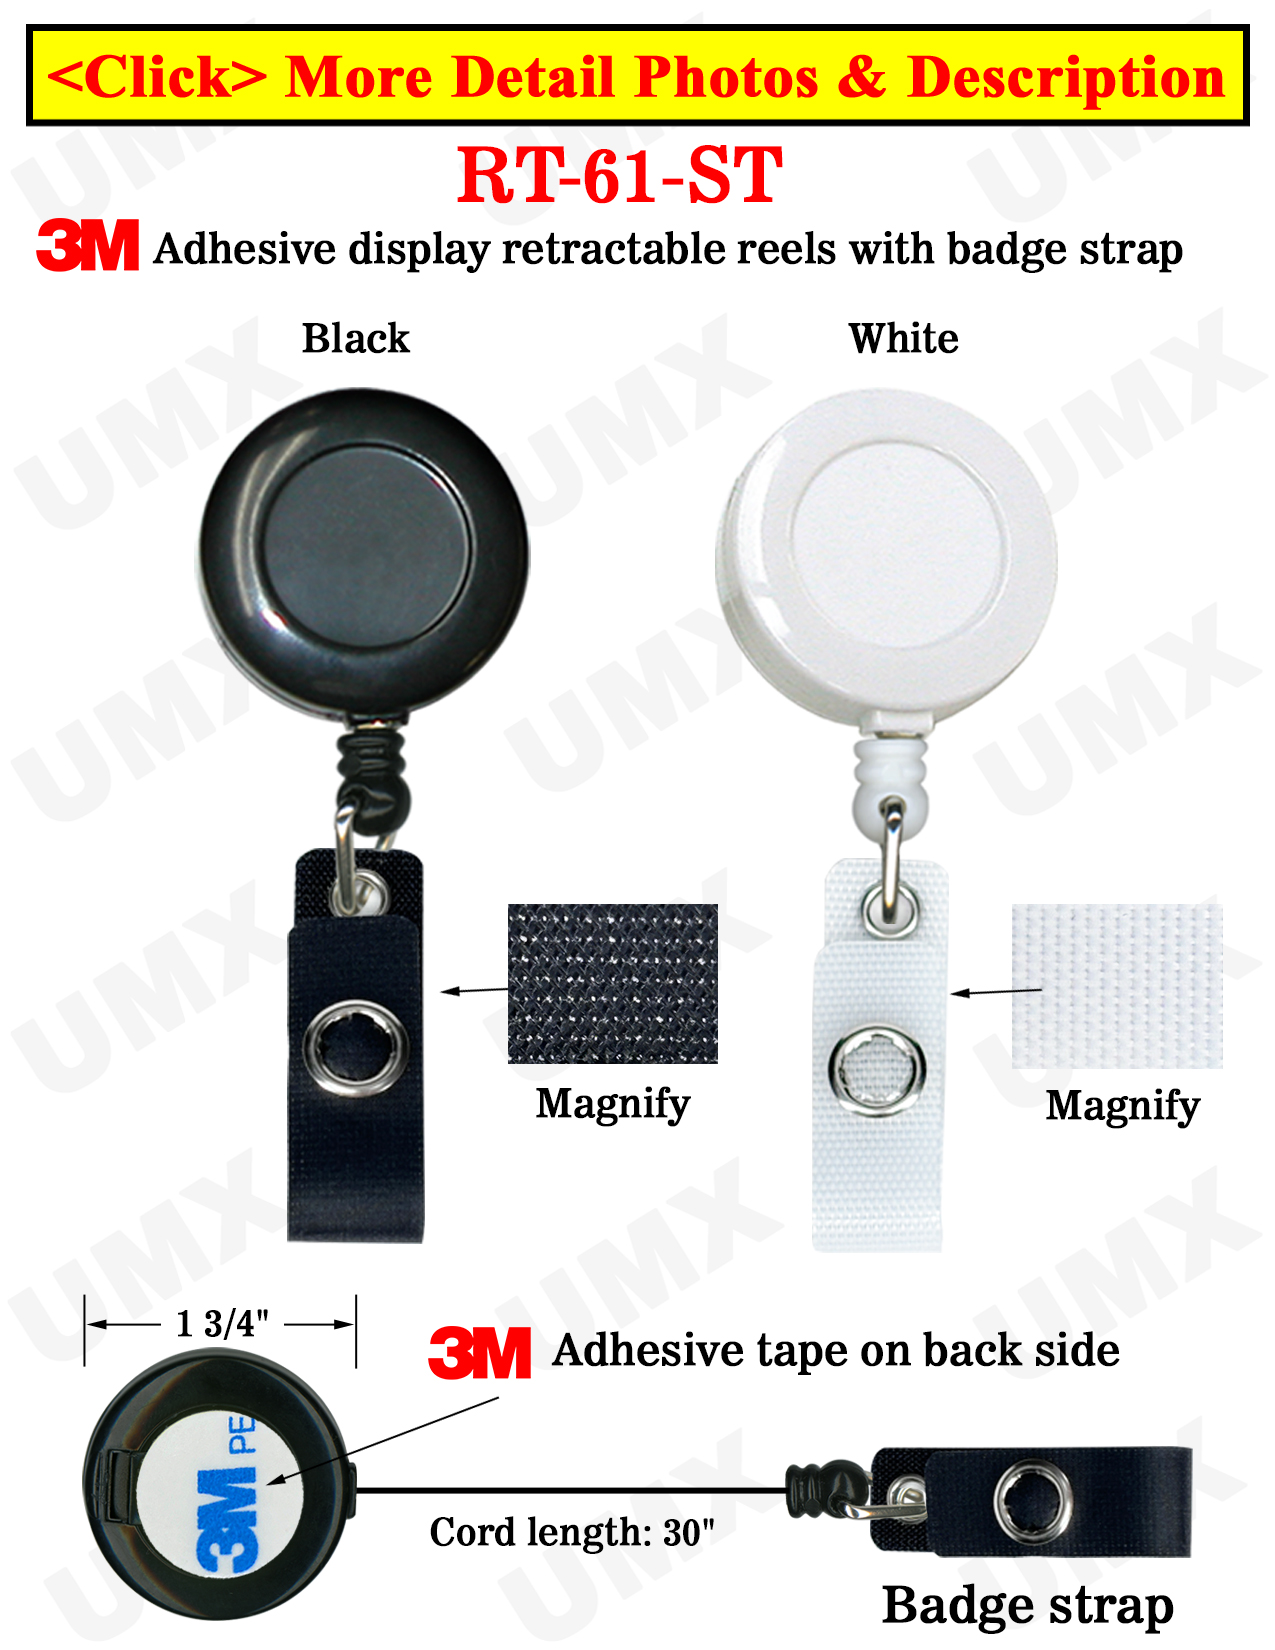 Adhesive Simple Snap-On Display Retractable Reels With Snap-On Straps and  Adhesive Backing 